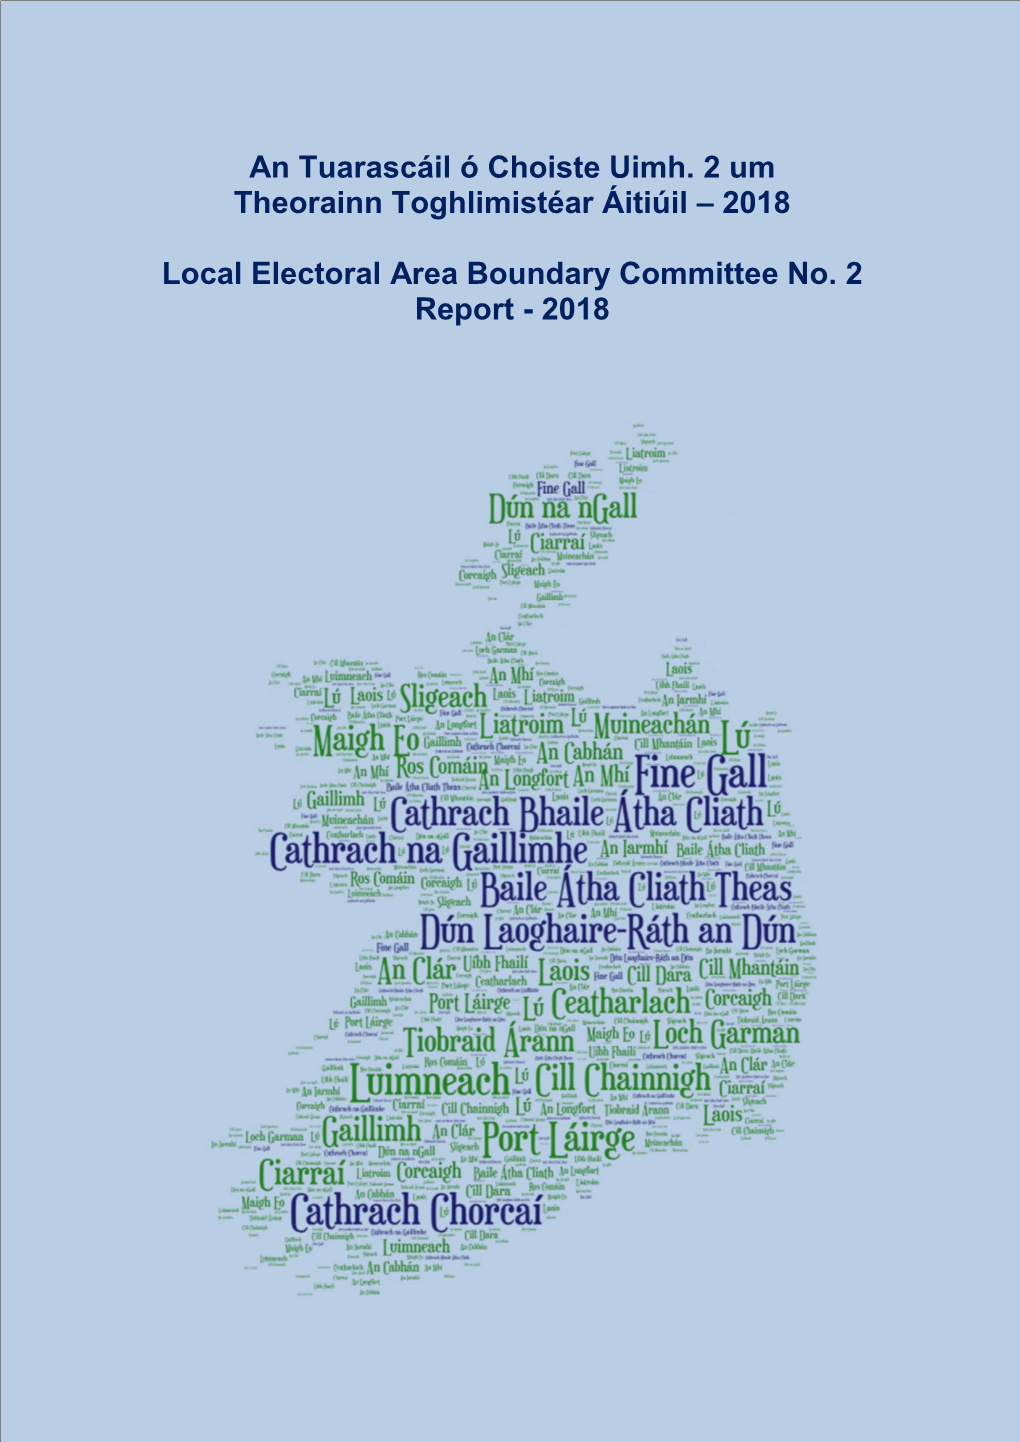 Local Electoral Area Boundary Committee No. 2 Report 2018